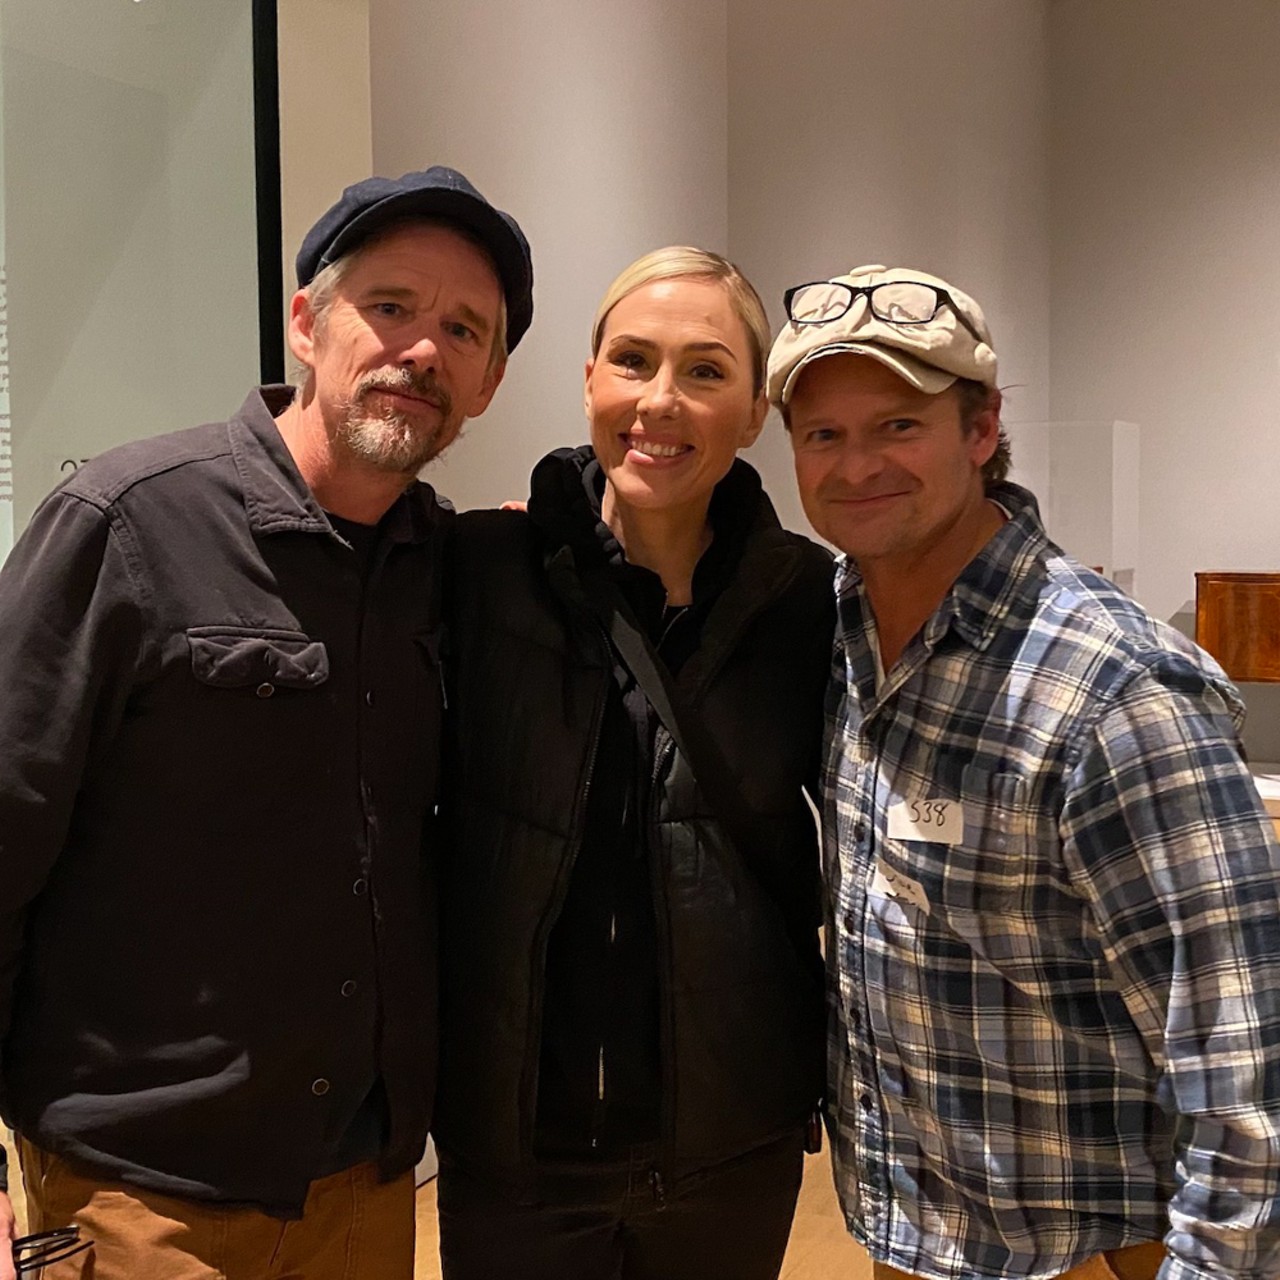  Speed Art Museum 
2035 S. 3rd St.
Ethan Hawke and Steve Zahn with Soozie Eastman of 502 Film Collective at a screening of the 1973 movie &#147;Badlands.&#148;
Photo via Soozie Eastman/502 Film Collective.